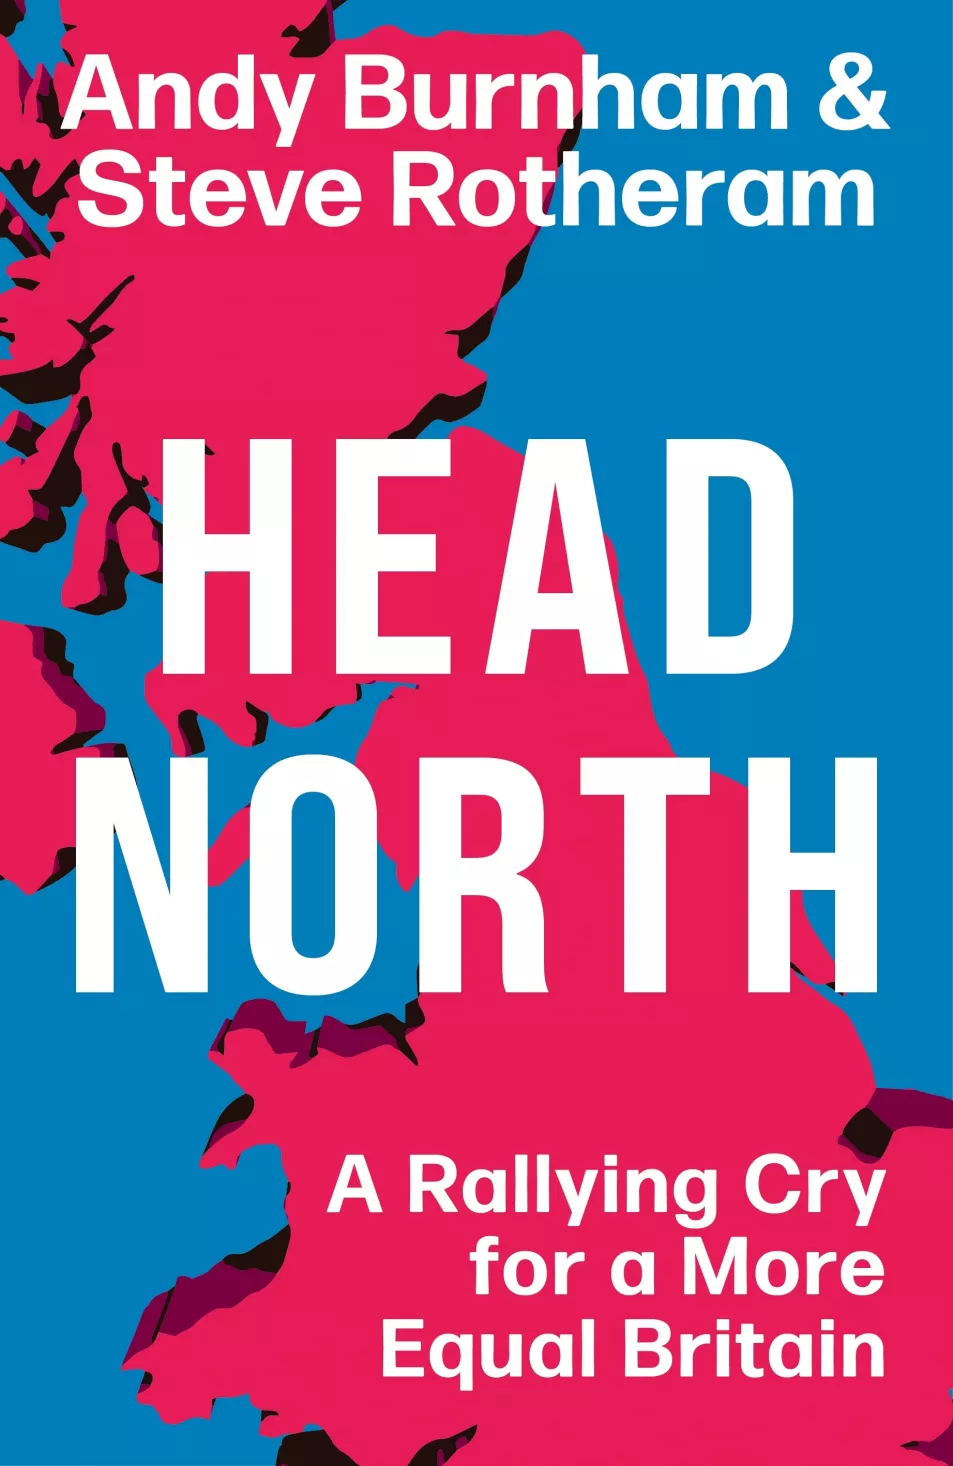 Book jacket of Head North by Andy Burnham and Steve Rotheram (Trapeze/PA)